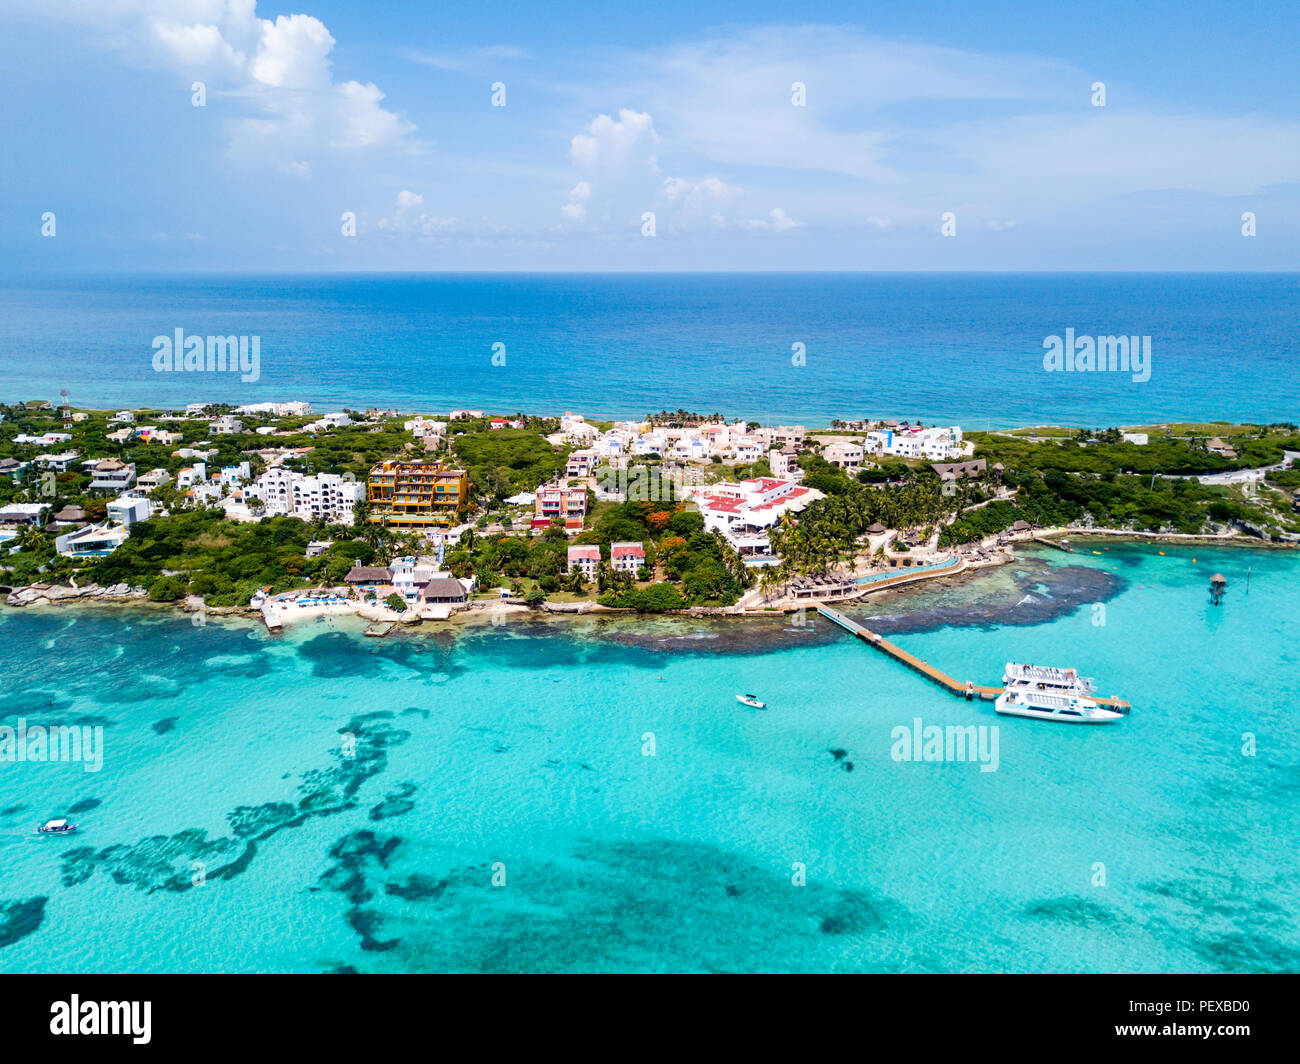 An aerial view of Isla Mujeres in Cancun, Mexico Stock Photo